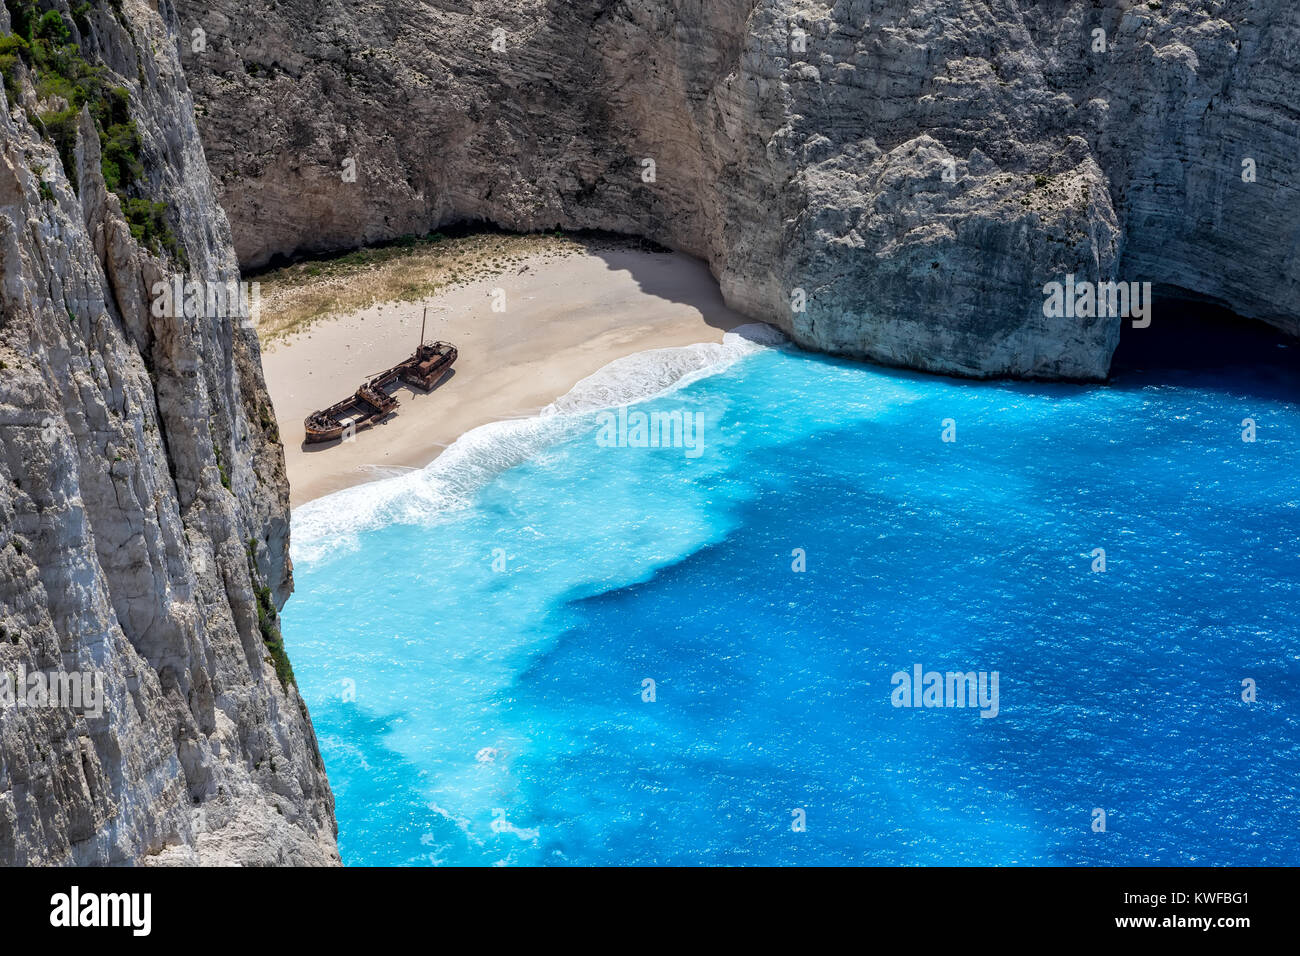 Navagio (Shipwreck) Beach in Zakynthos island, Greece. Navagio Beach is a popular attraction among tourists visiting the island of Zakynthos.The best  Stock Photo